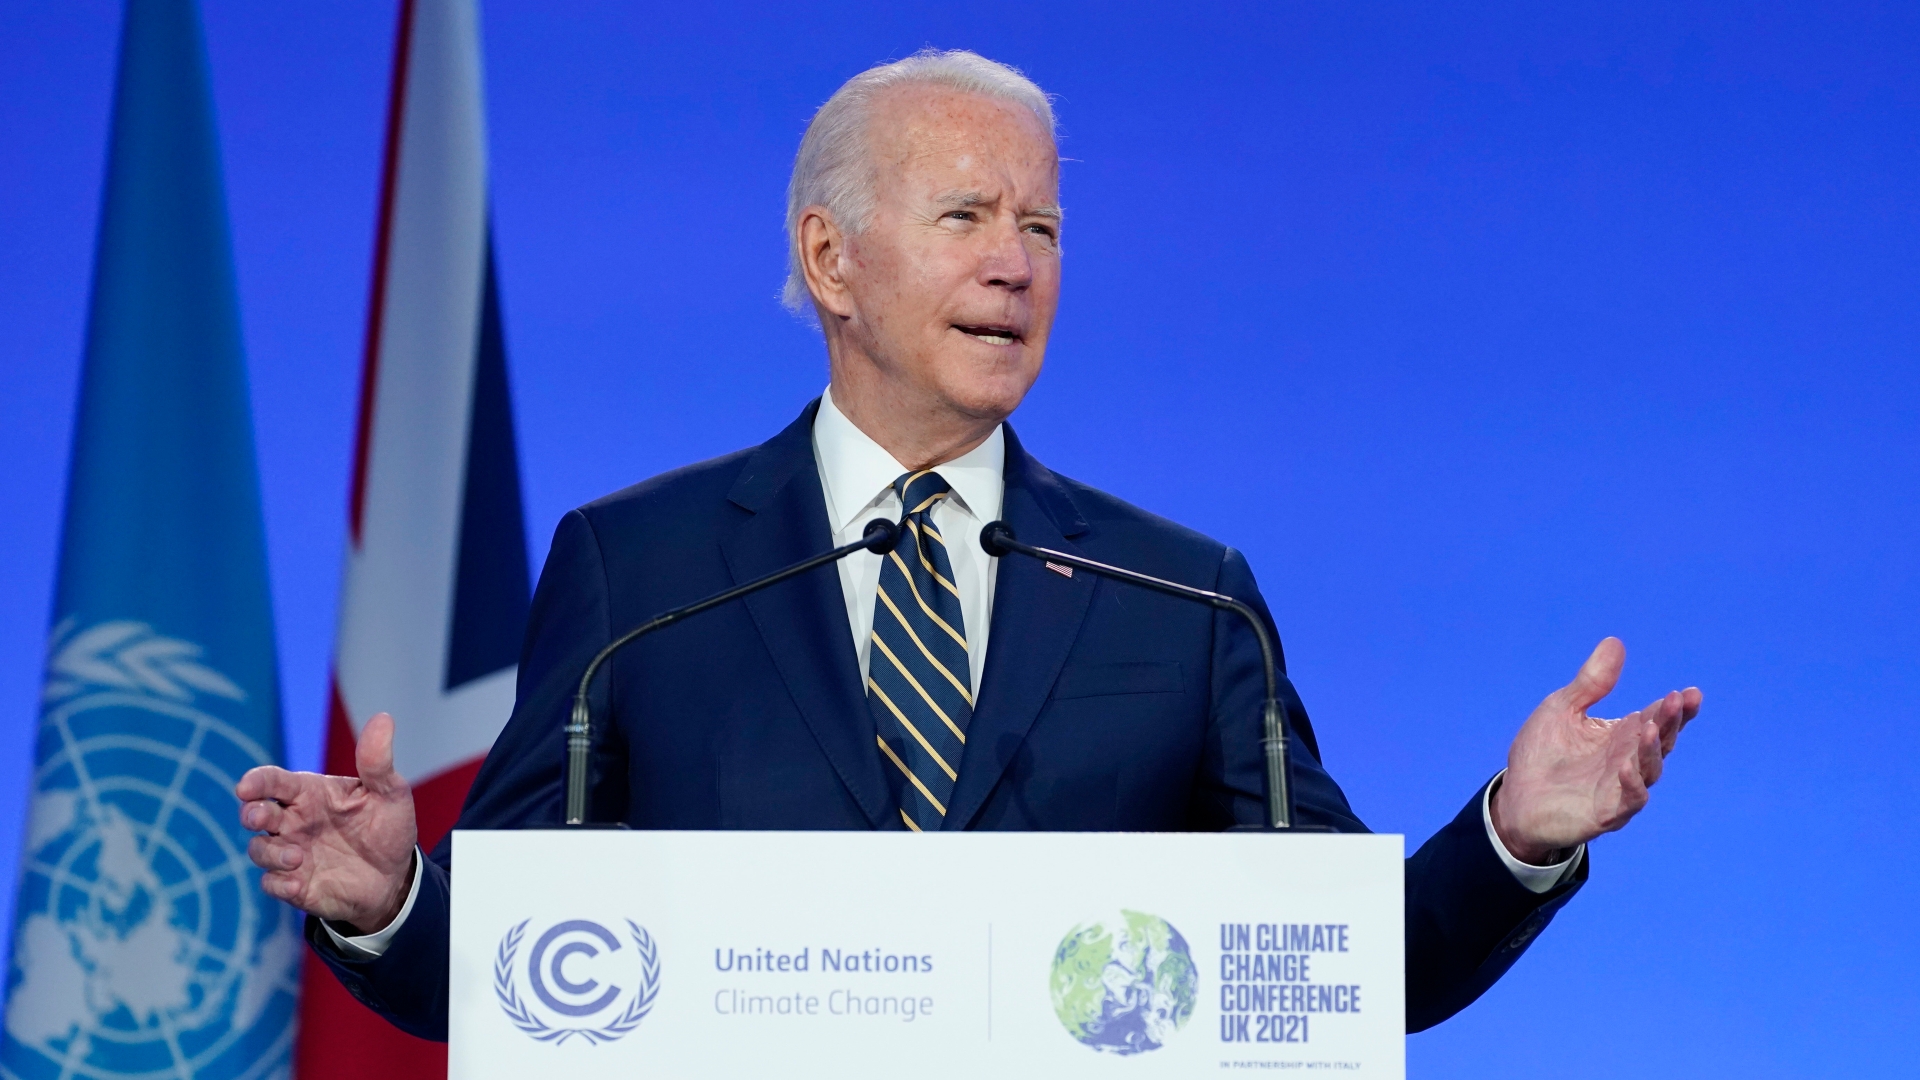 climate　from　high-stakes　begins,　As　apologizes　for　Washington　Biden　Paris　accord　The　Post　summit　withdrawal